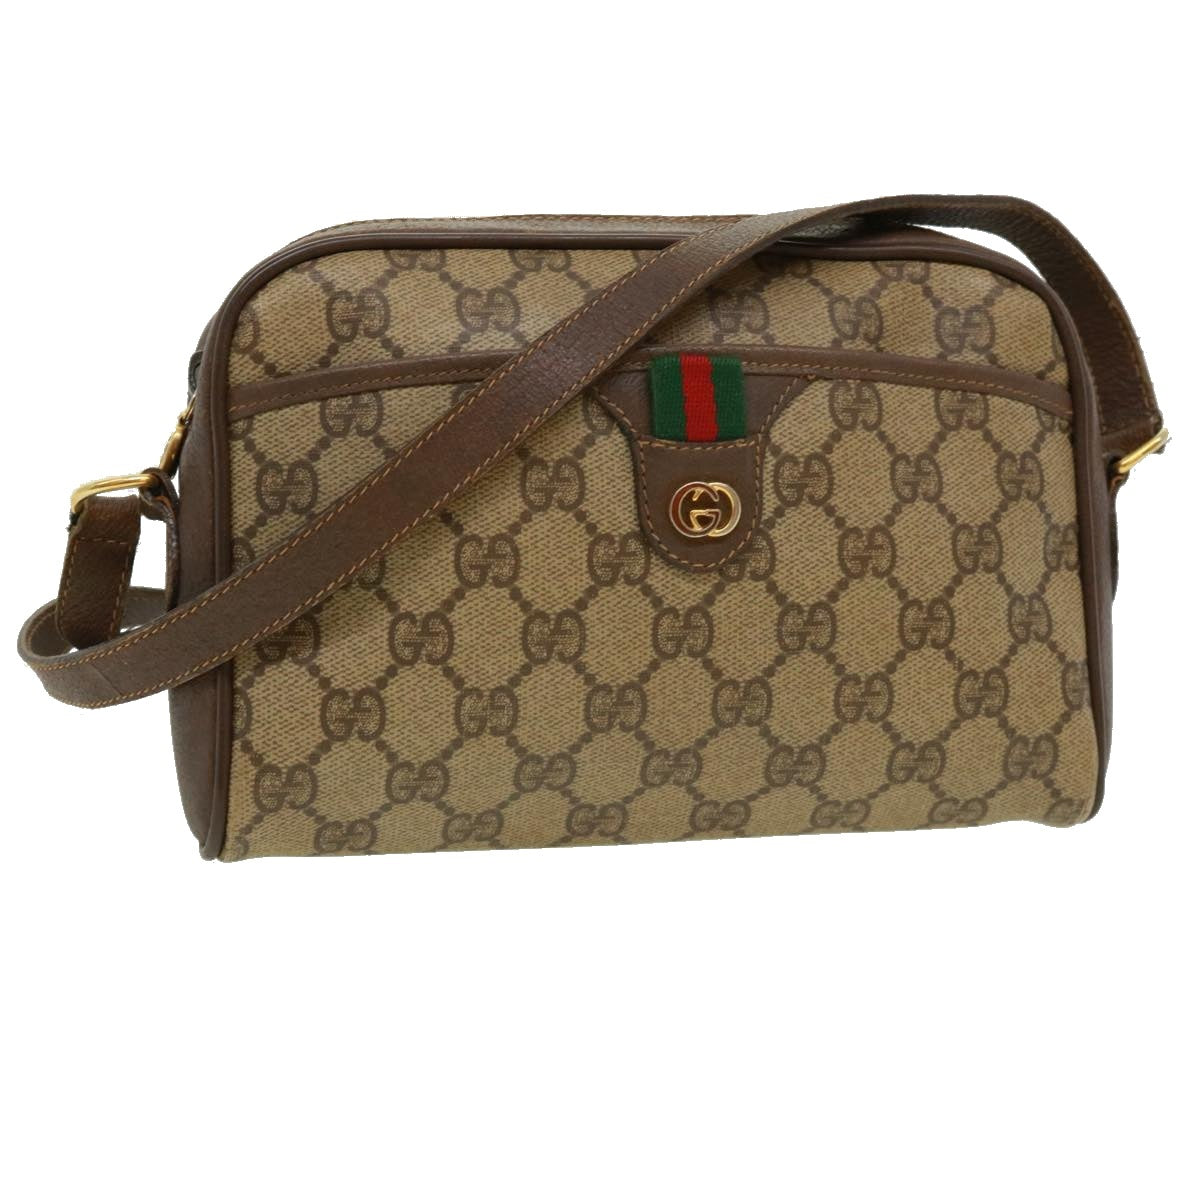 GUCCI GG Canvas Web Sherry Line Shoulder Bag Beige Red Green Auth rd3519